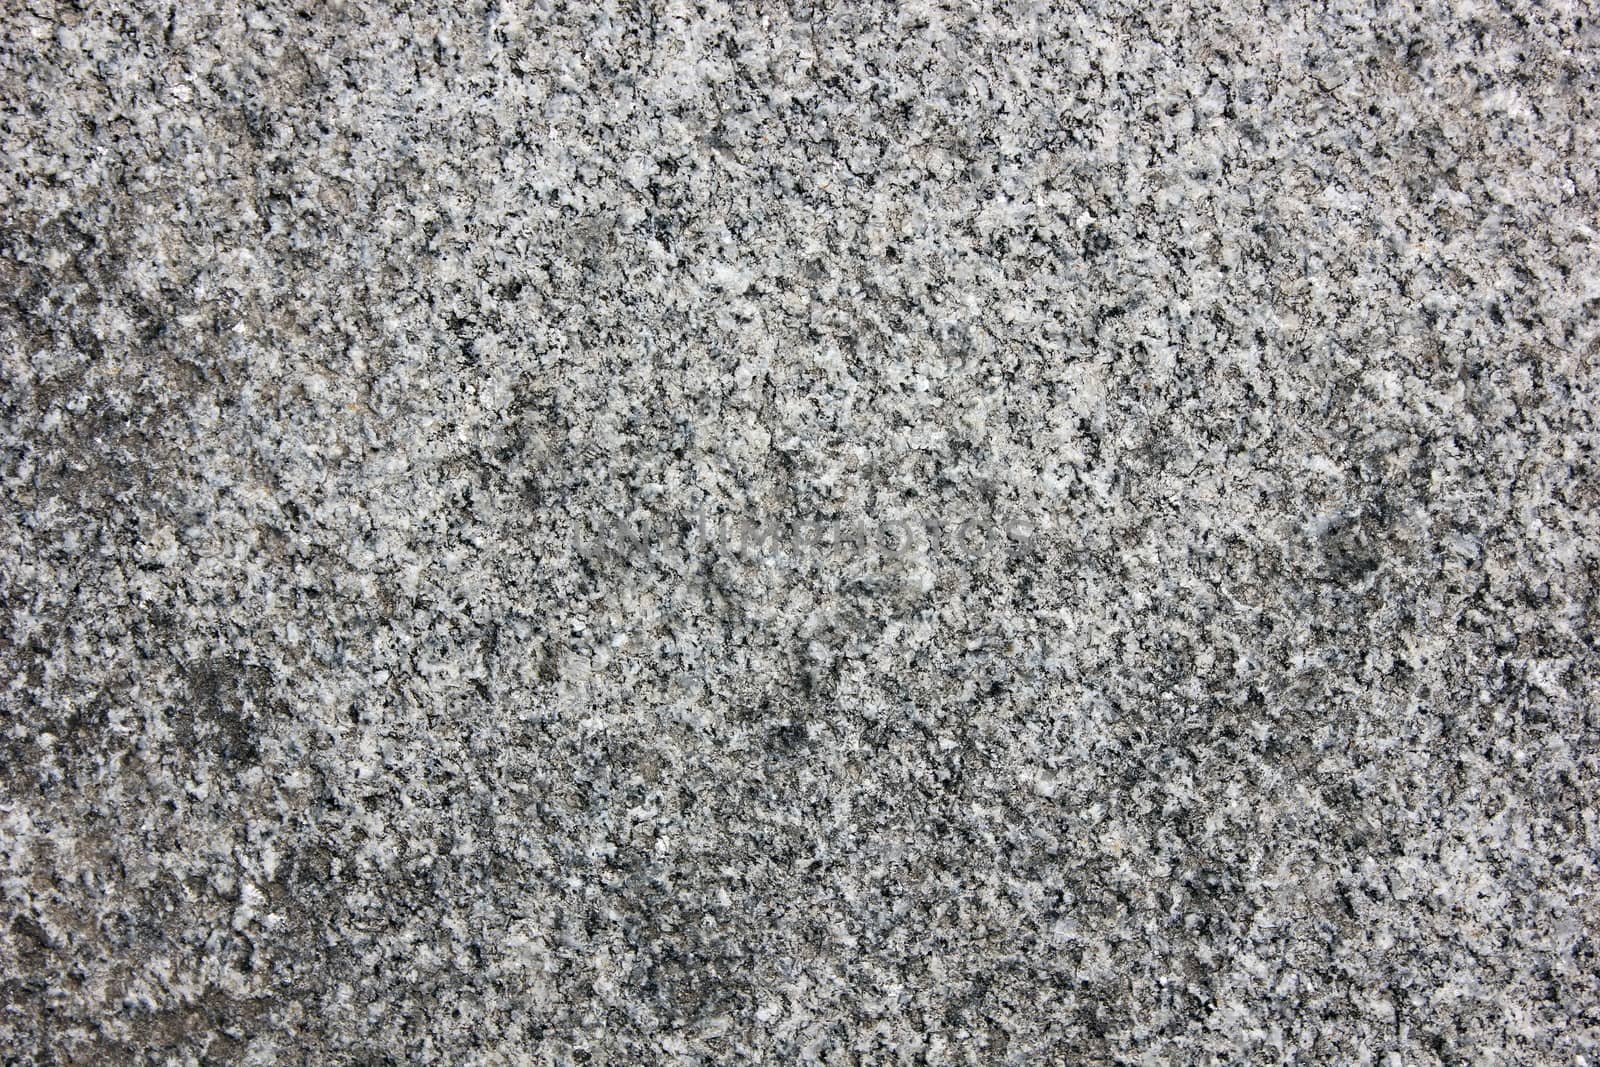 Monolith surface from granite by Vadimdem